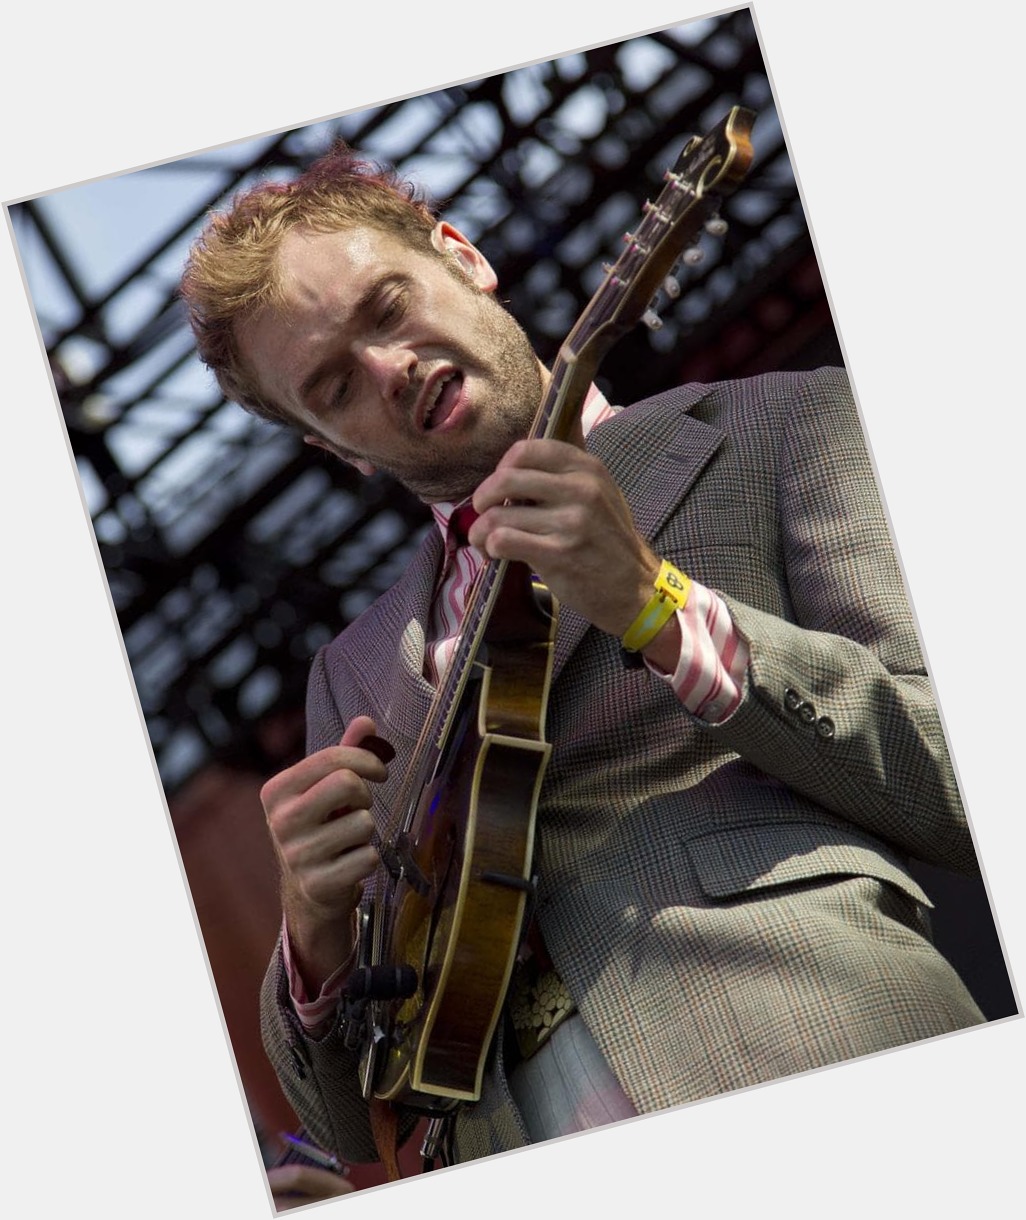 Chris Thile marriage 3